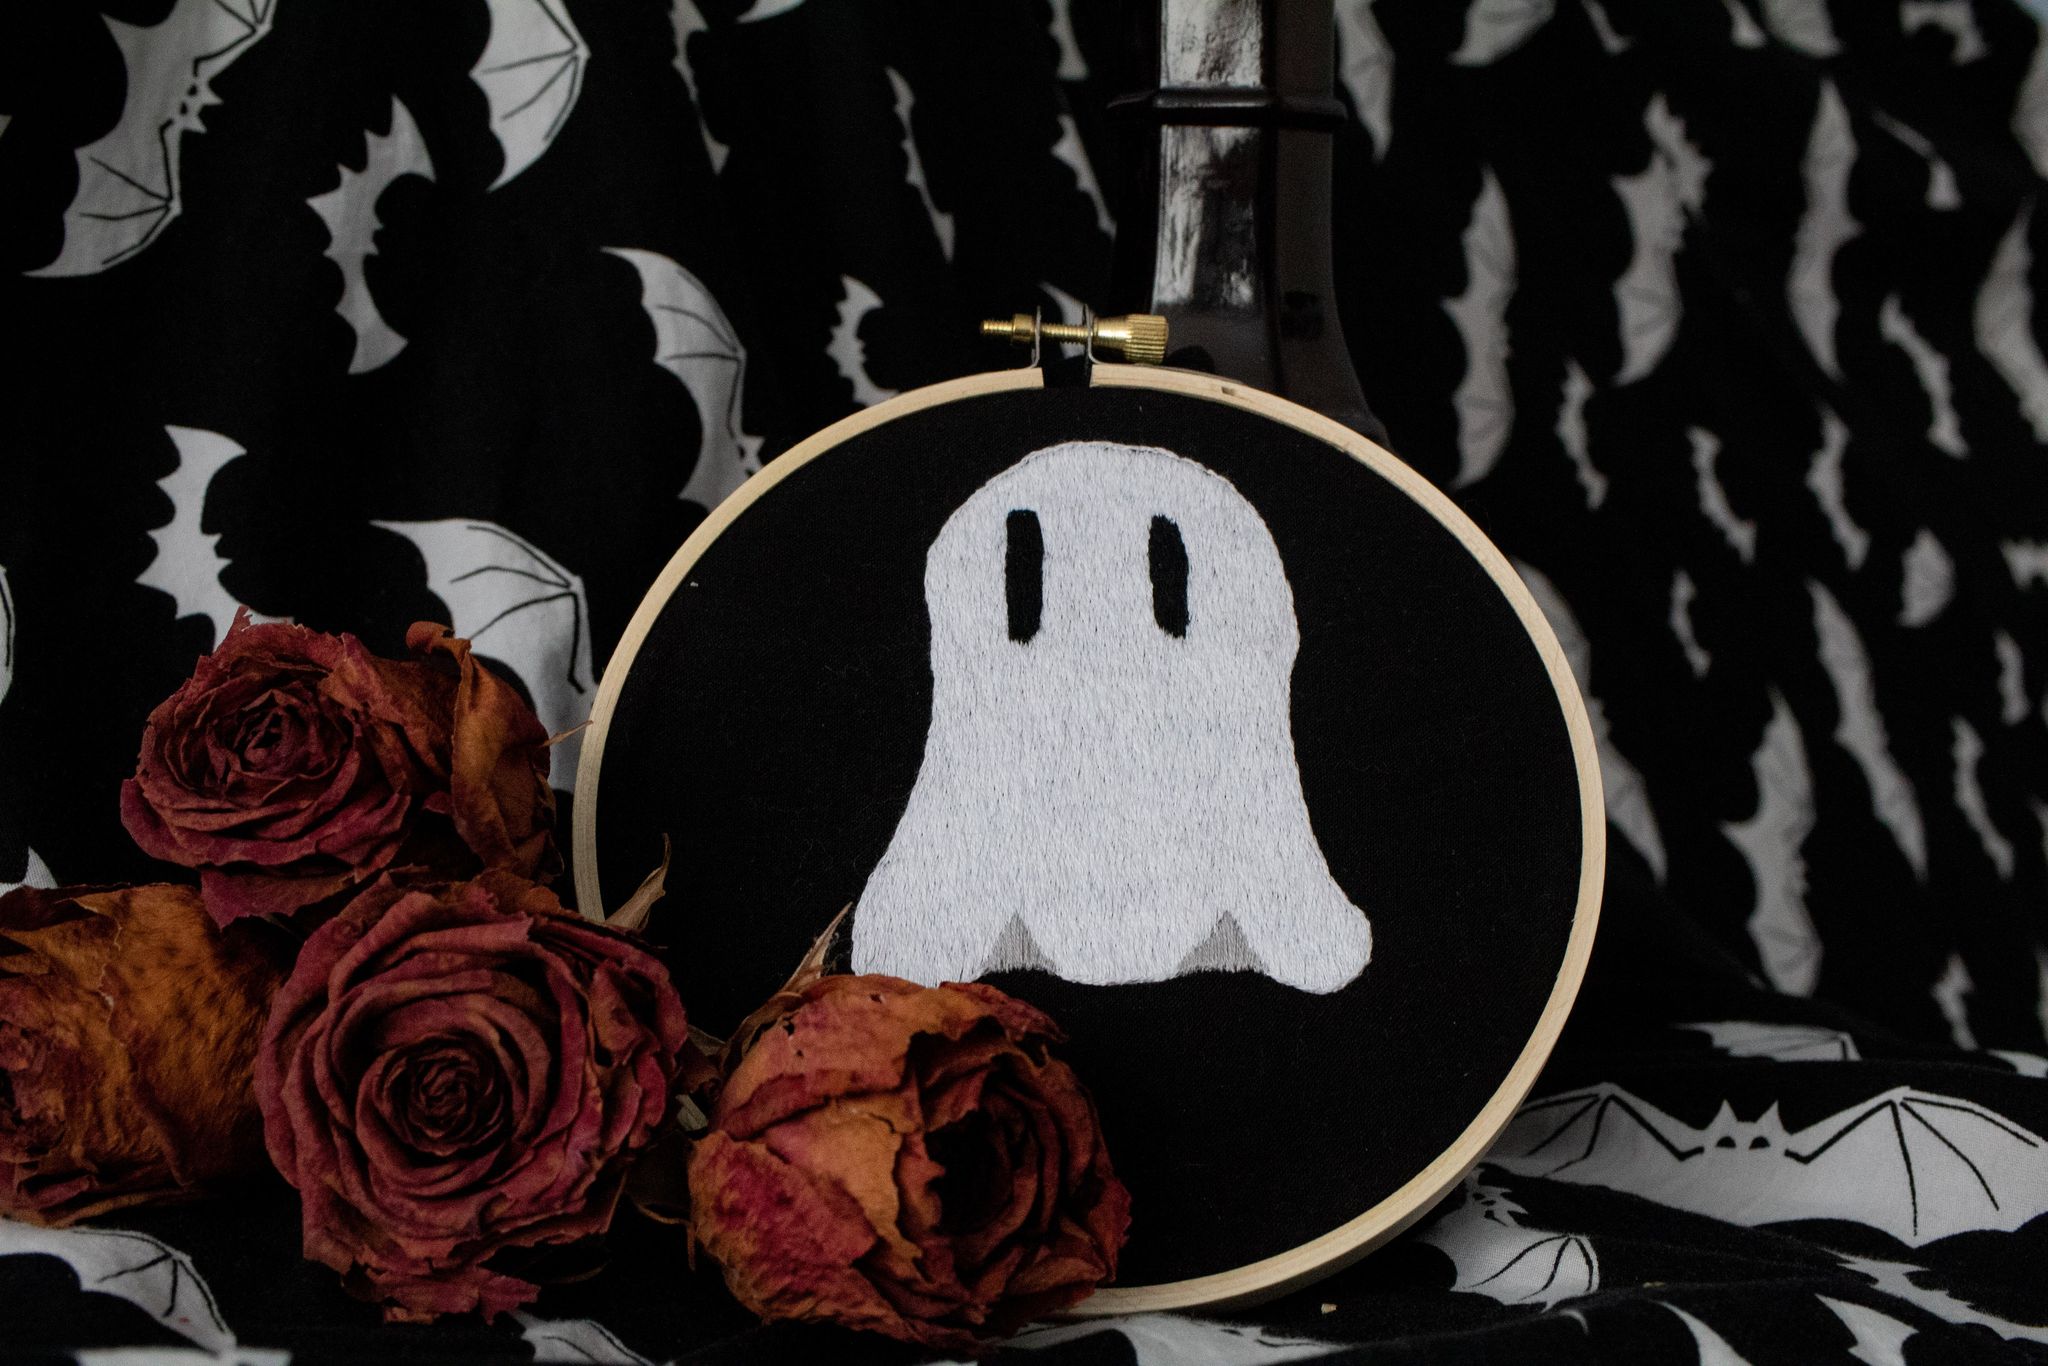 Product image of "Lonely Ghostie" embroidered ghost set against black backdrop with white bats, leaning on old books and surrounded by dried red roses